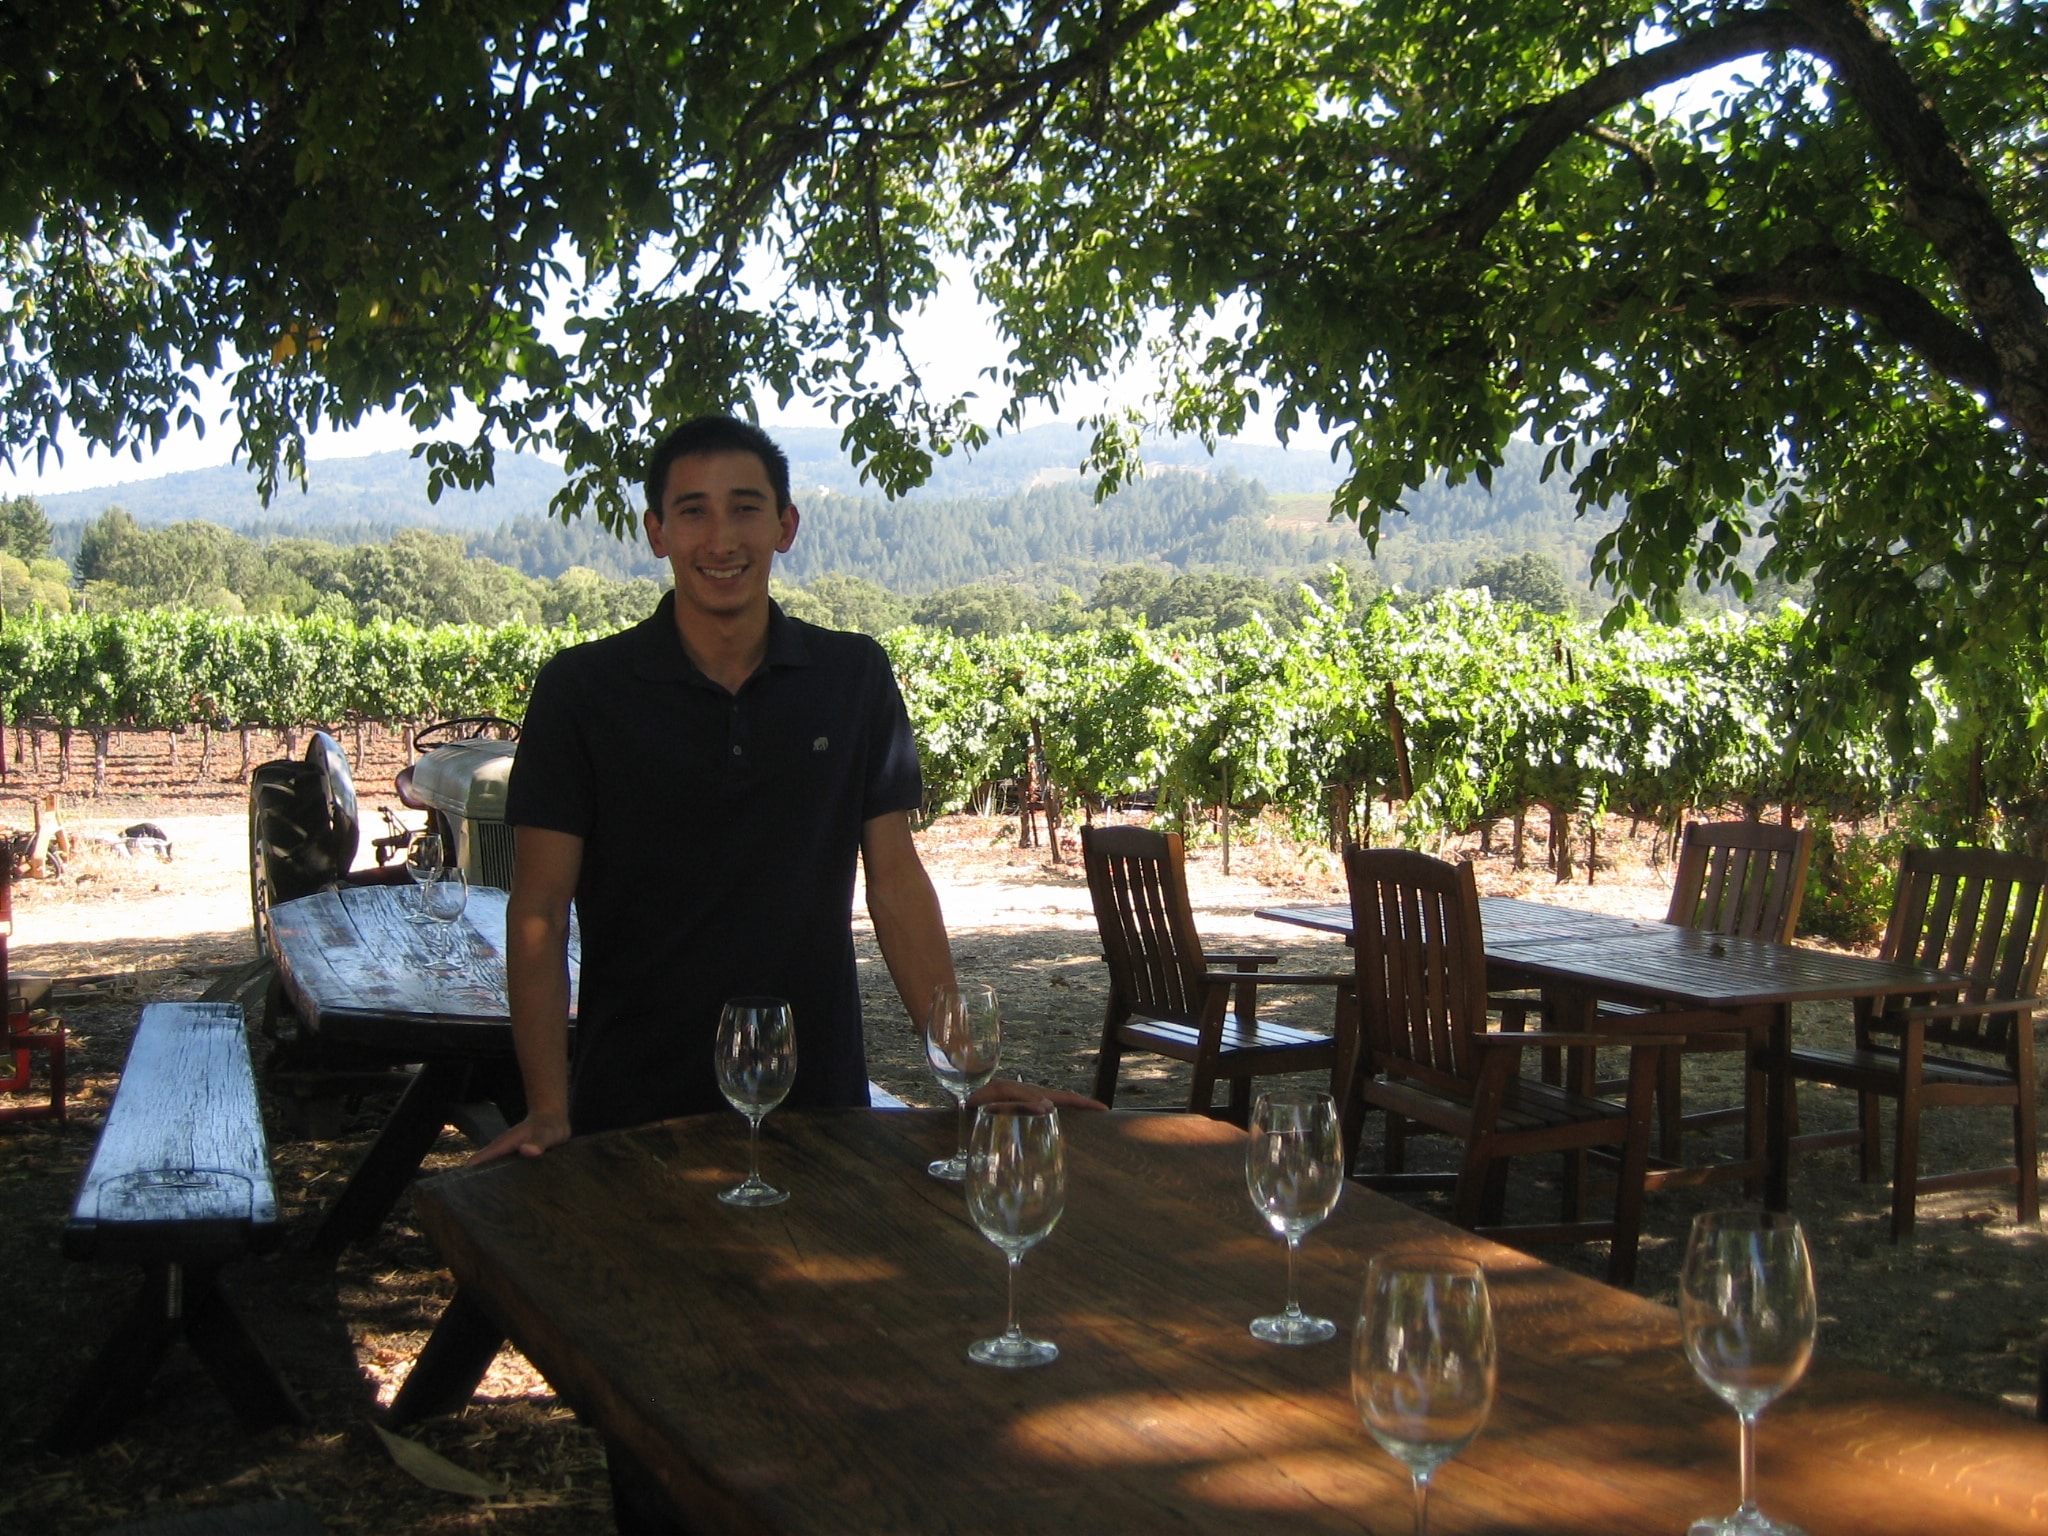 Emilio Tedeschi poses in the winery's lovely outdoor seating area